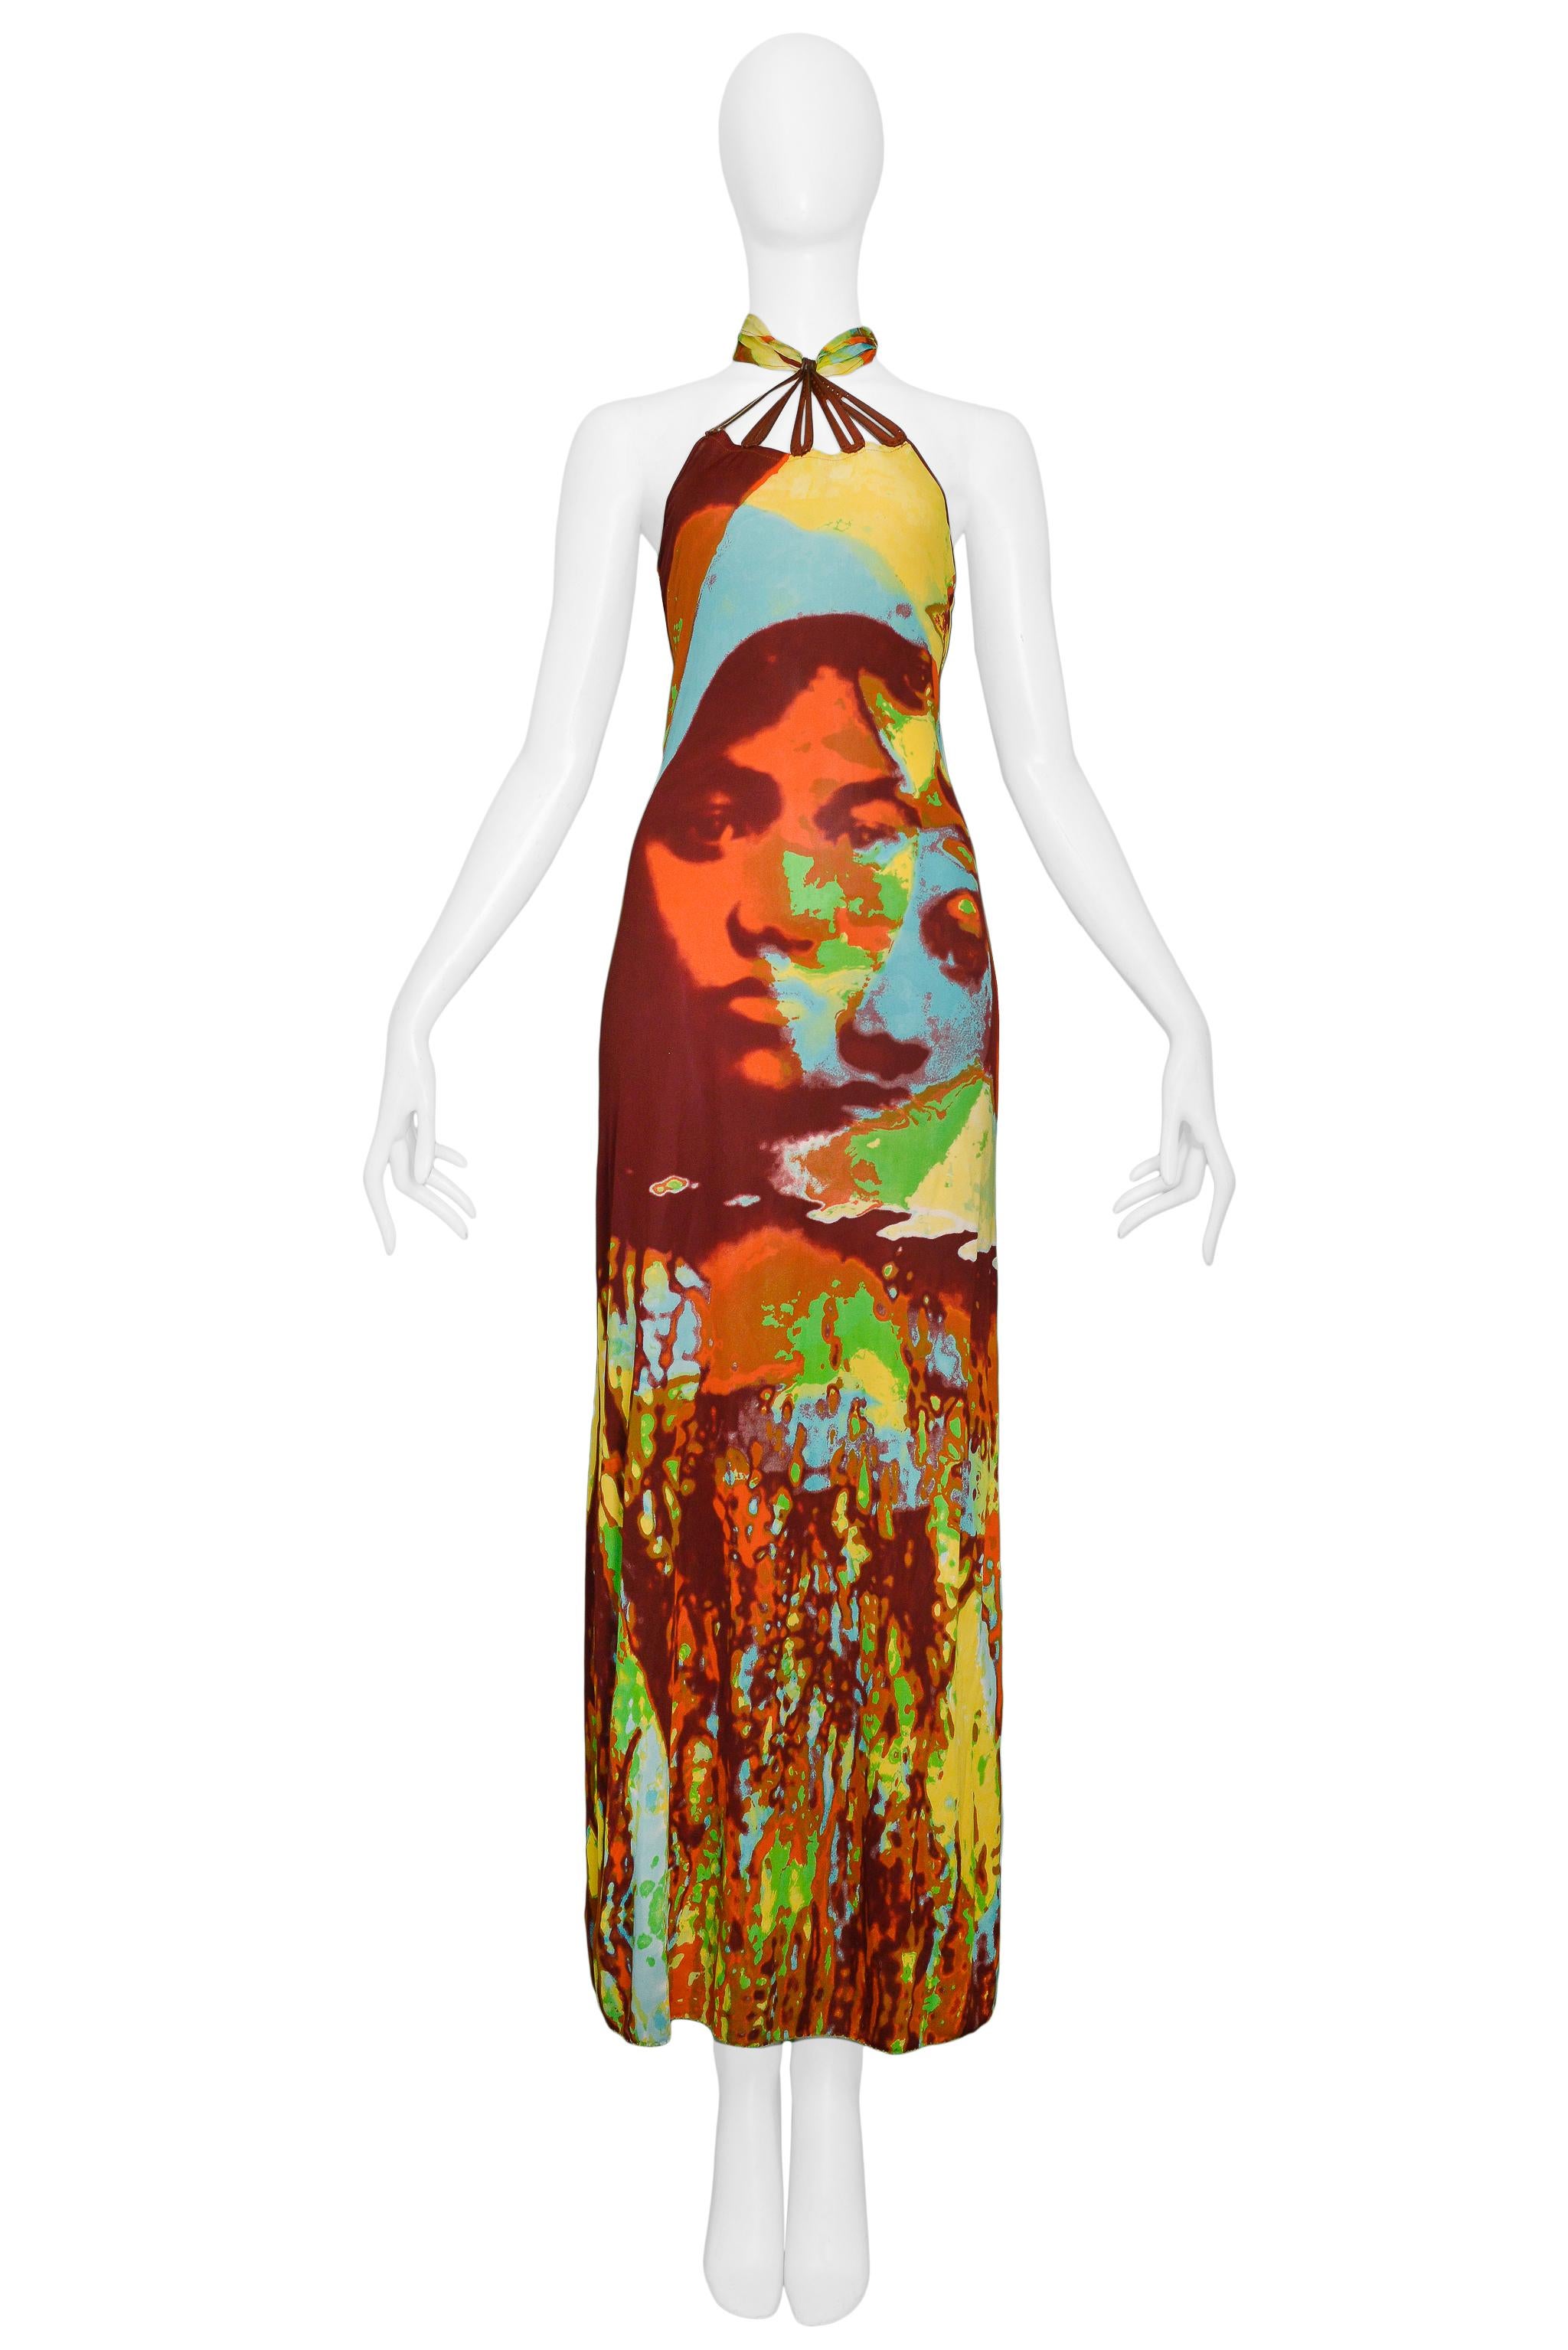 Resurrection Vintage is excited to offer a vintage Jean Paul Gaultier multicolor halter dress featuring a leather collar, exposed back, graphic face print, and maxi body.

Jean Paul Gaultier
Size: 42
100% Rayon
2000 Collection
Excellent Vintage